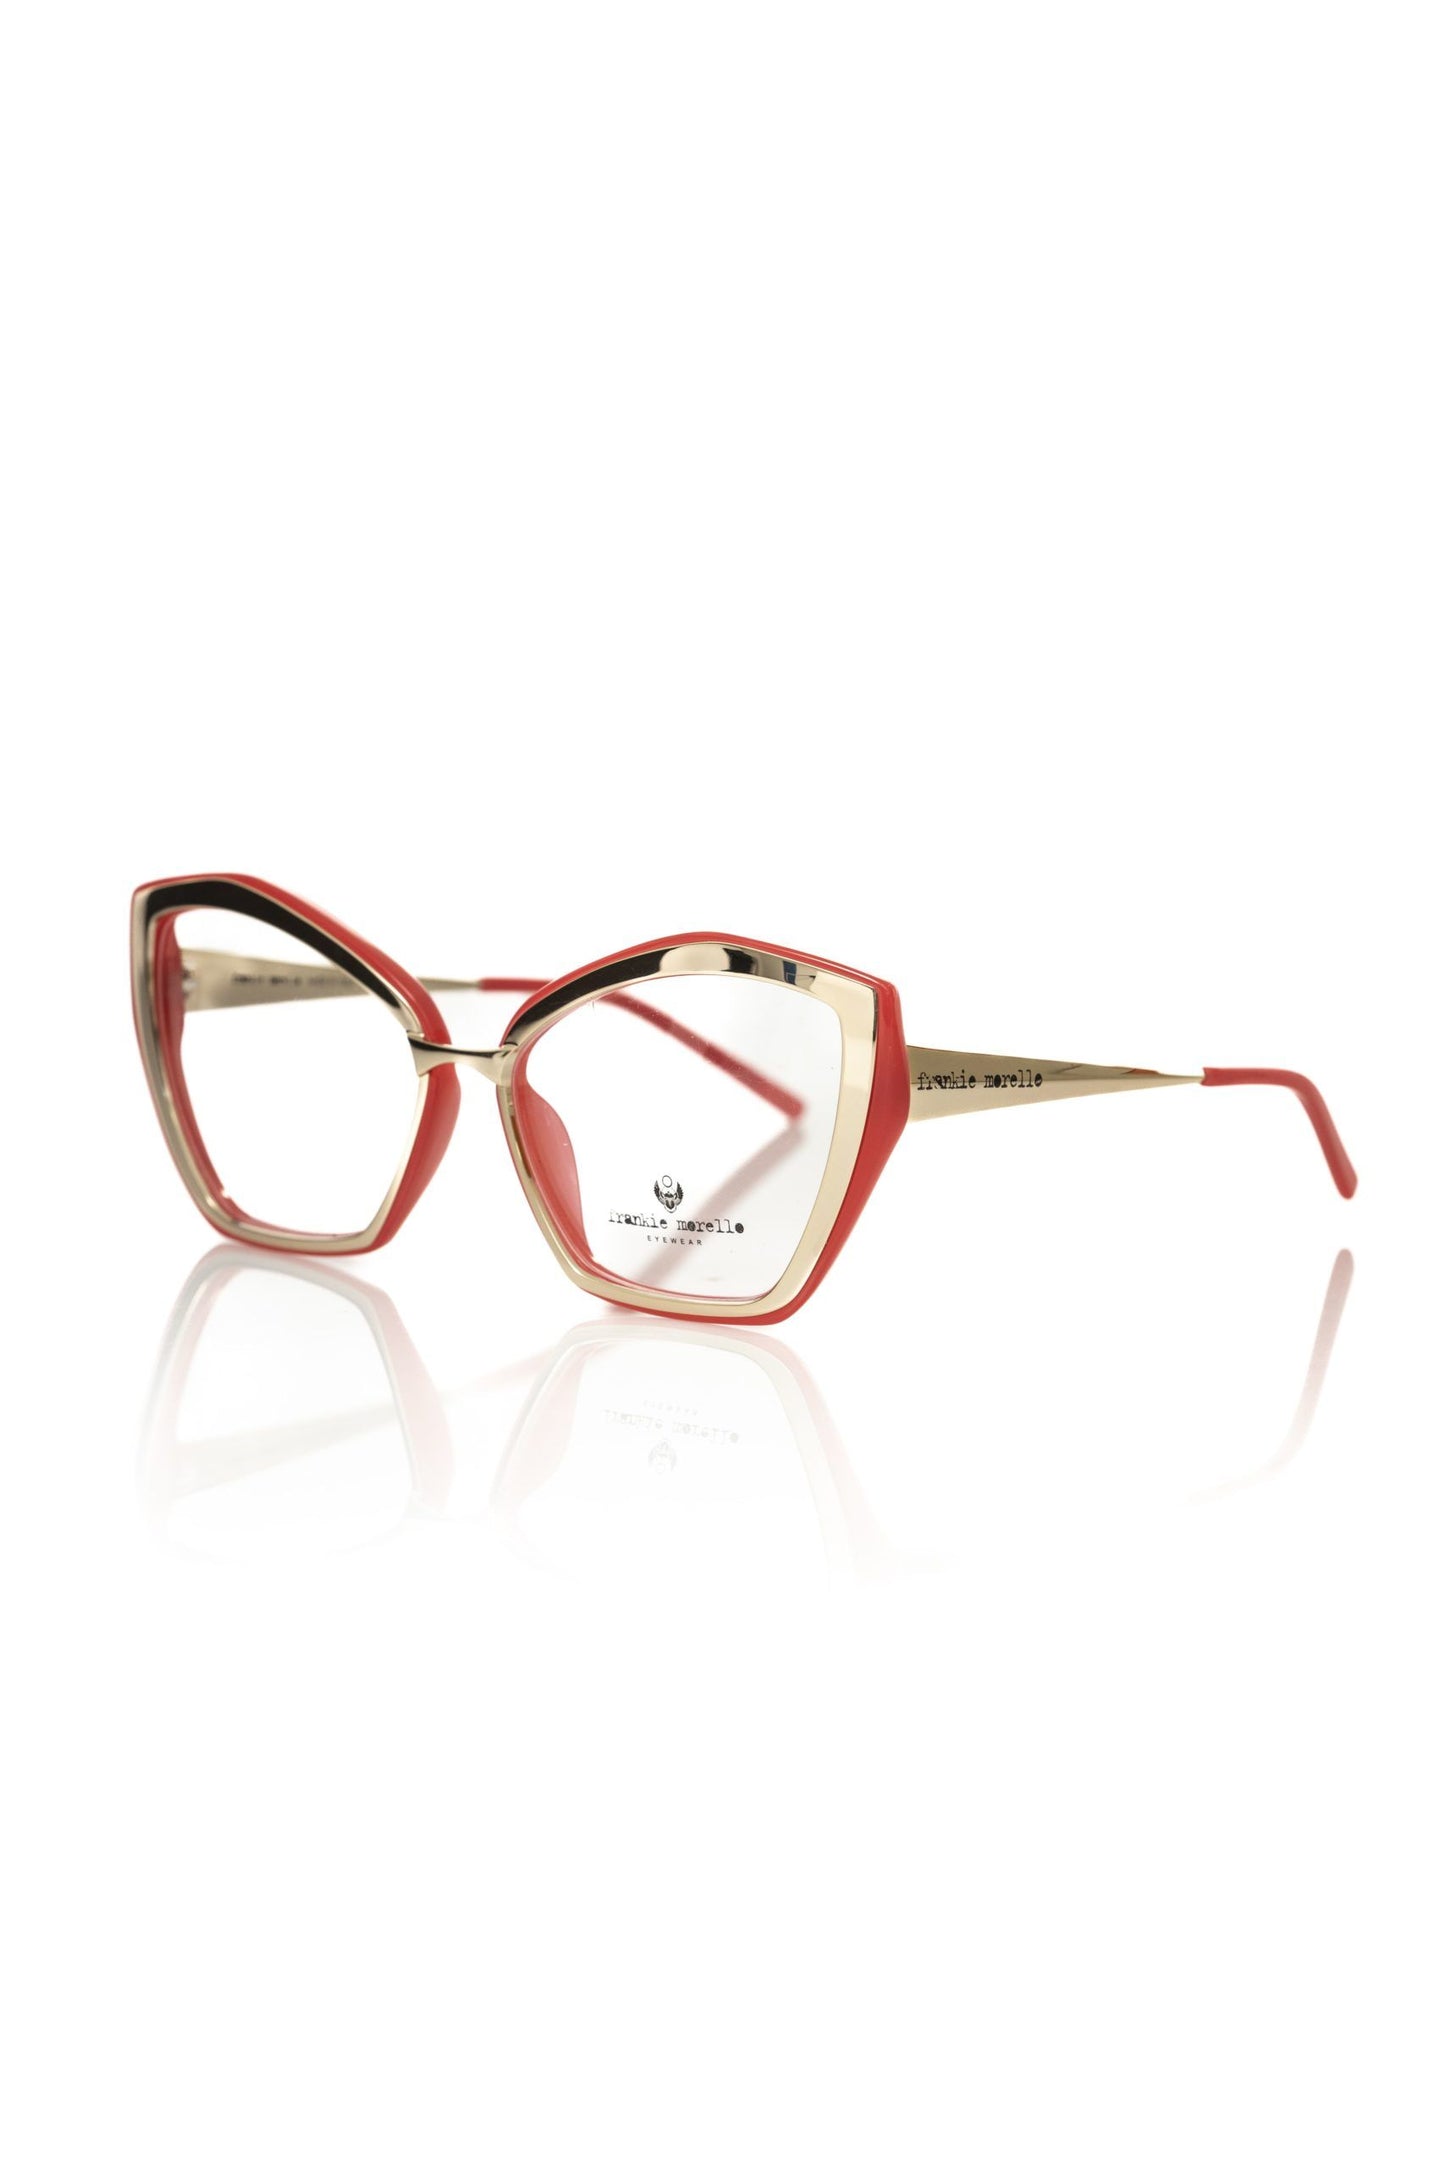 Frankie Morello FRMO-22097 Red Acetate Frames - Designed by Frankie Morello Available to Buy at a Discounted Price on Moon Behind The Hill Online Designer Discount Store